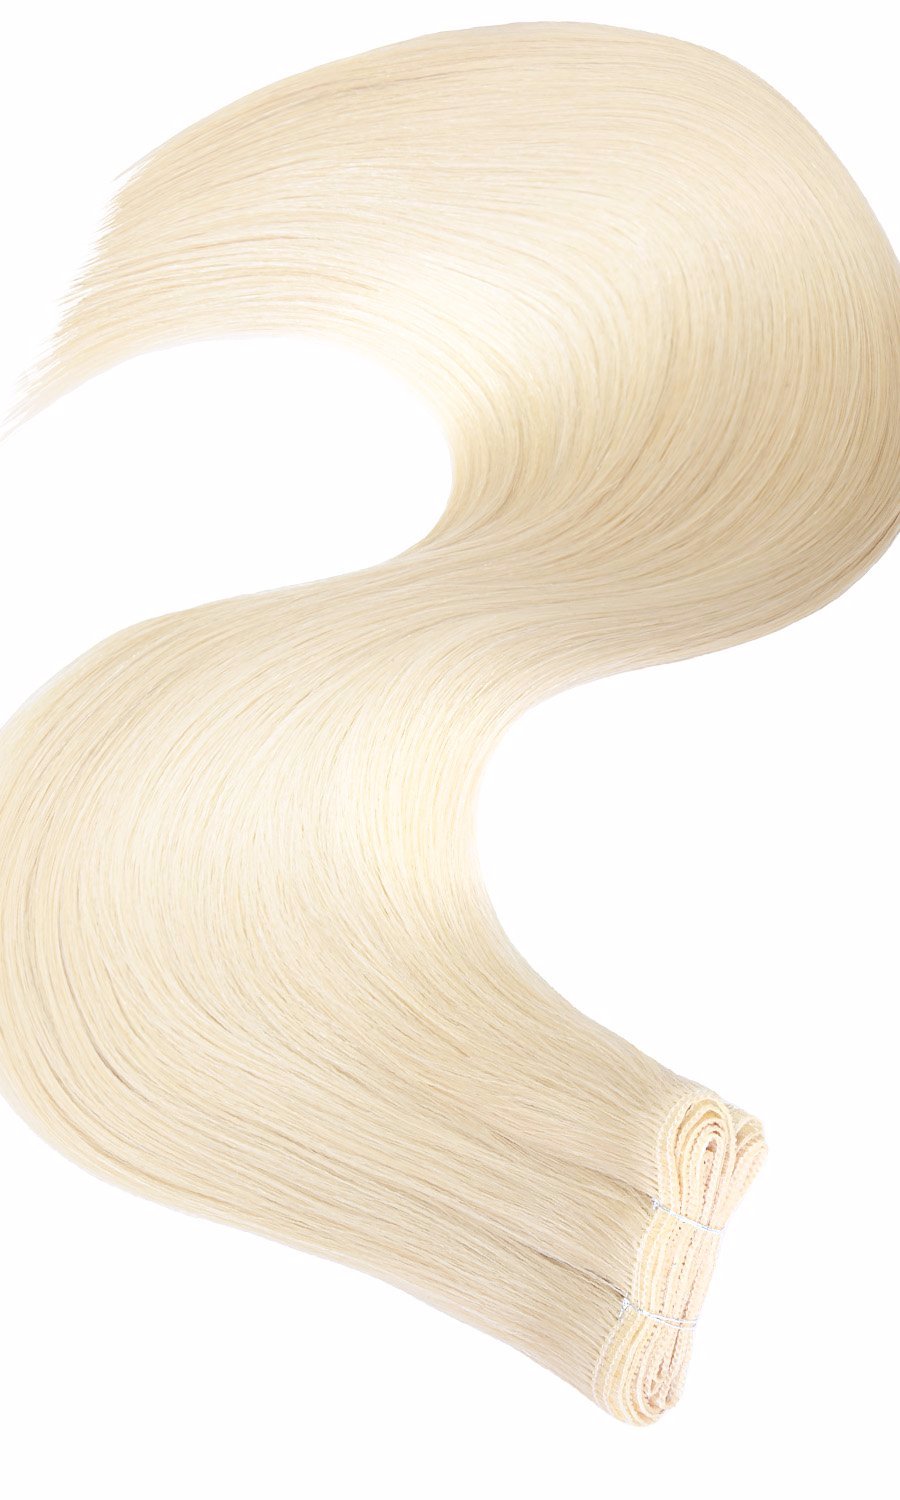 Pro Deluxe Goldblond Flat Weft Extensions